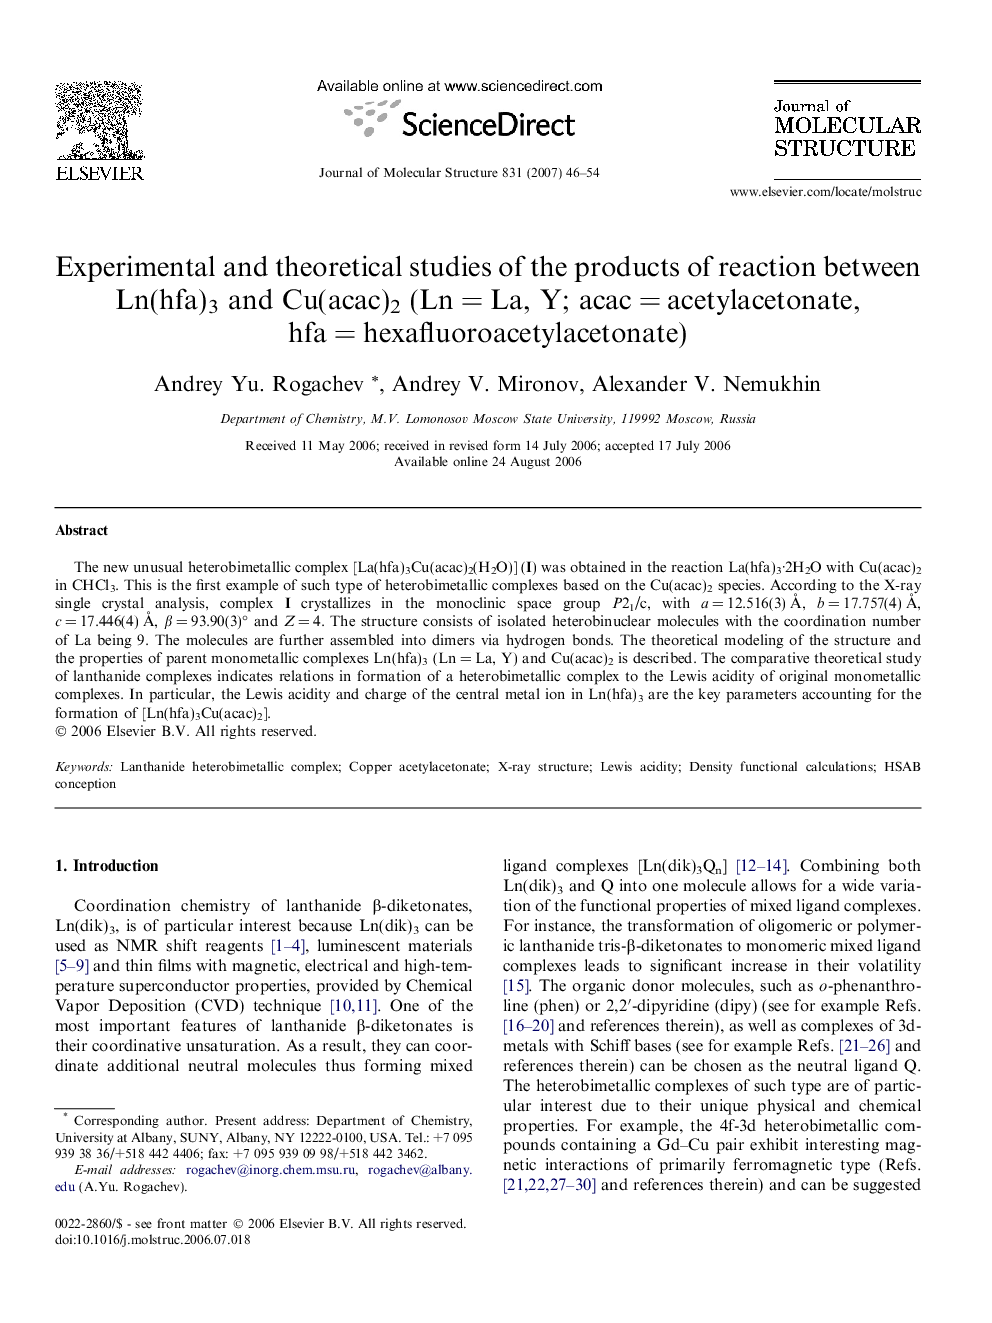 Experimental and theoretical studies of the products of reaction between Ln(hfa)3 and Cu(acac)2 (Ln = La, Y; acac = acetylacetonate, hfa = hexafluoroacetylacetonate)